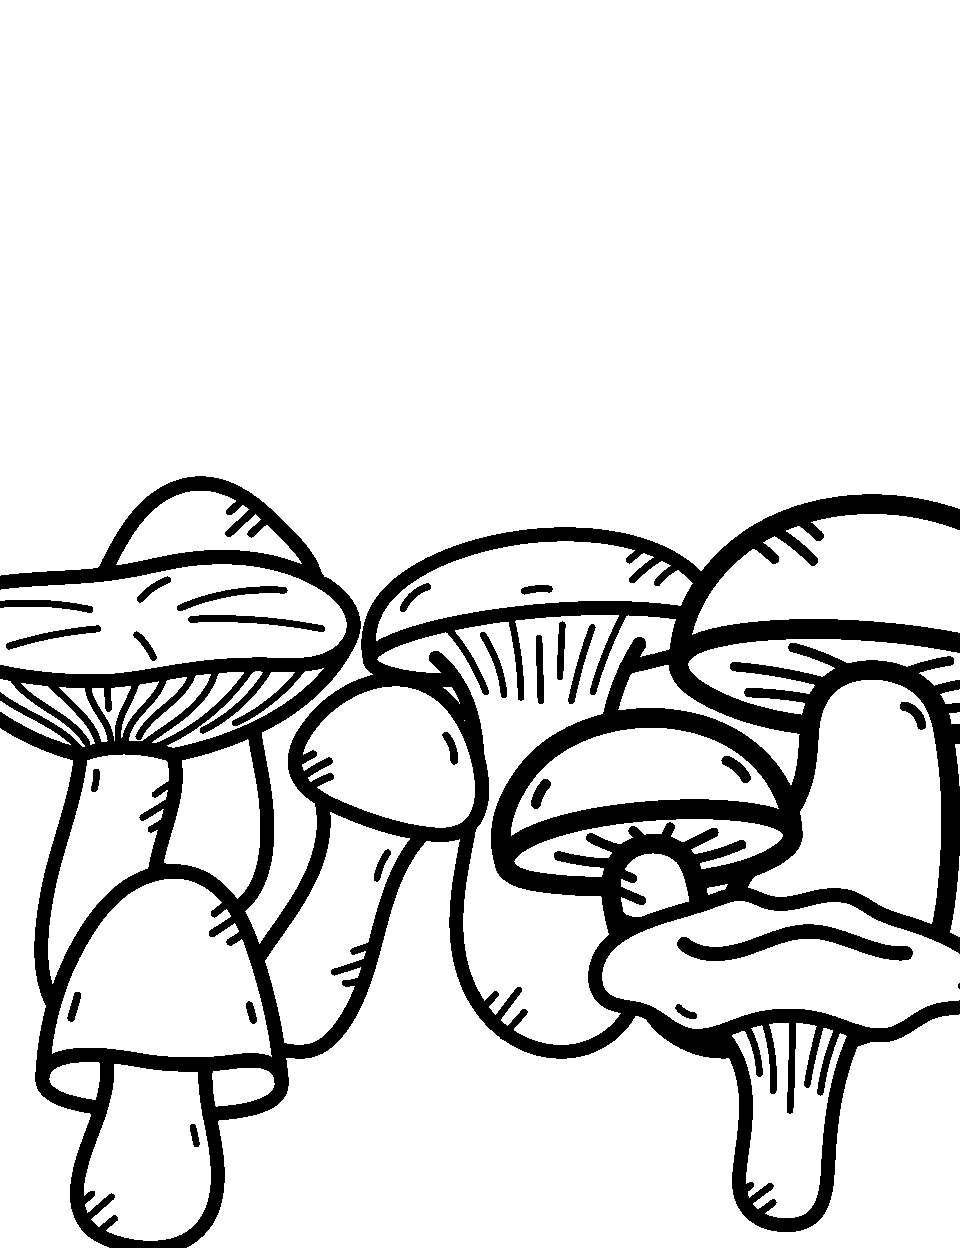 Mushroom Meadow Coloring Page - A meadow filled with mushrooms of various sizes.